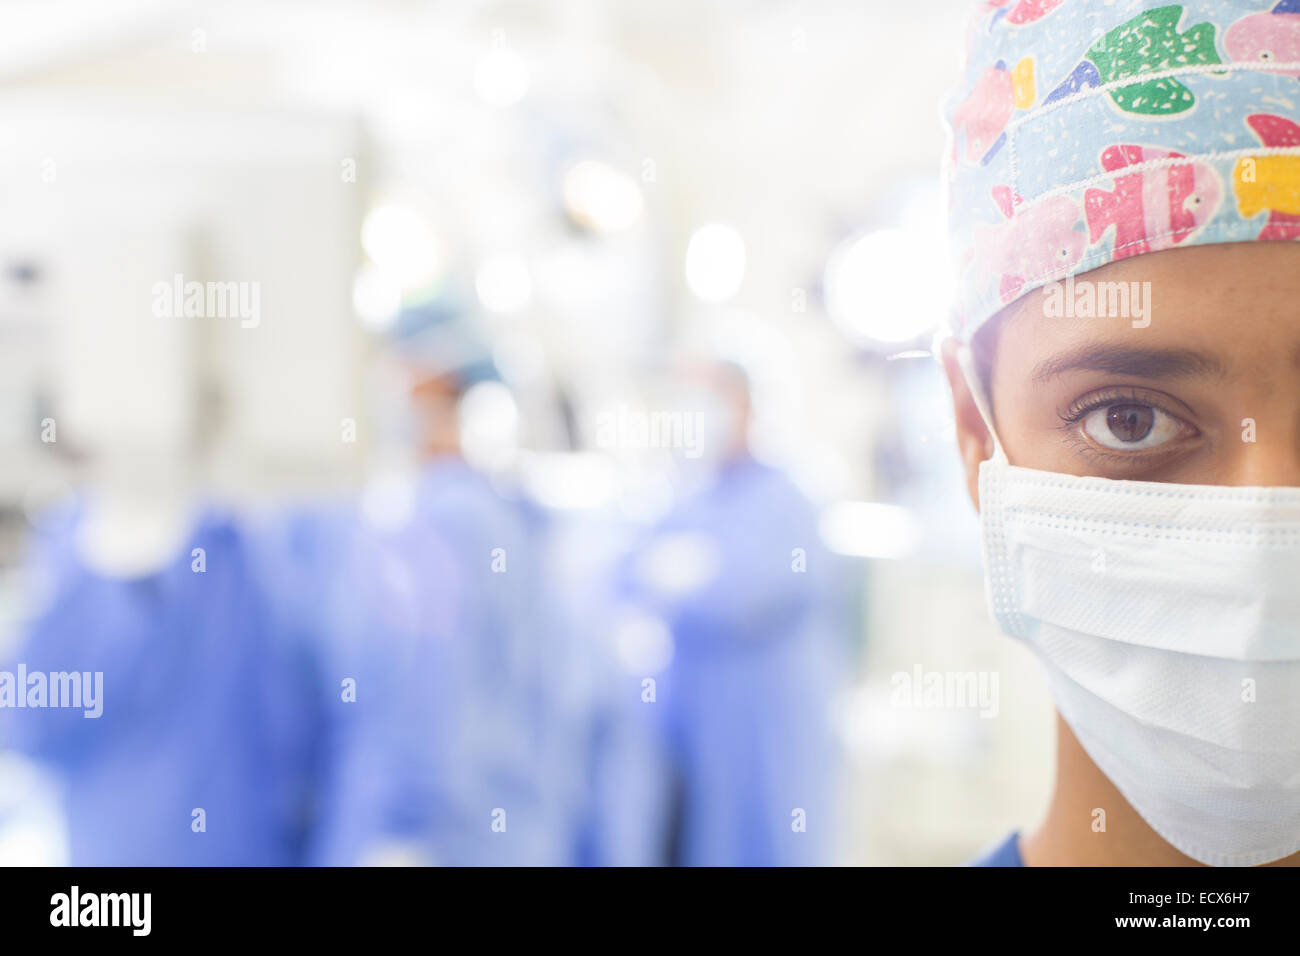 Portrait Of Masked Surgeon With Blurred Hospital Setting In Stock